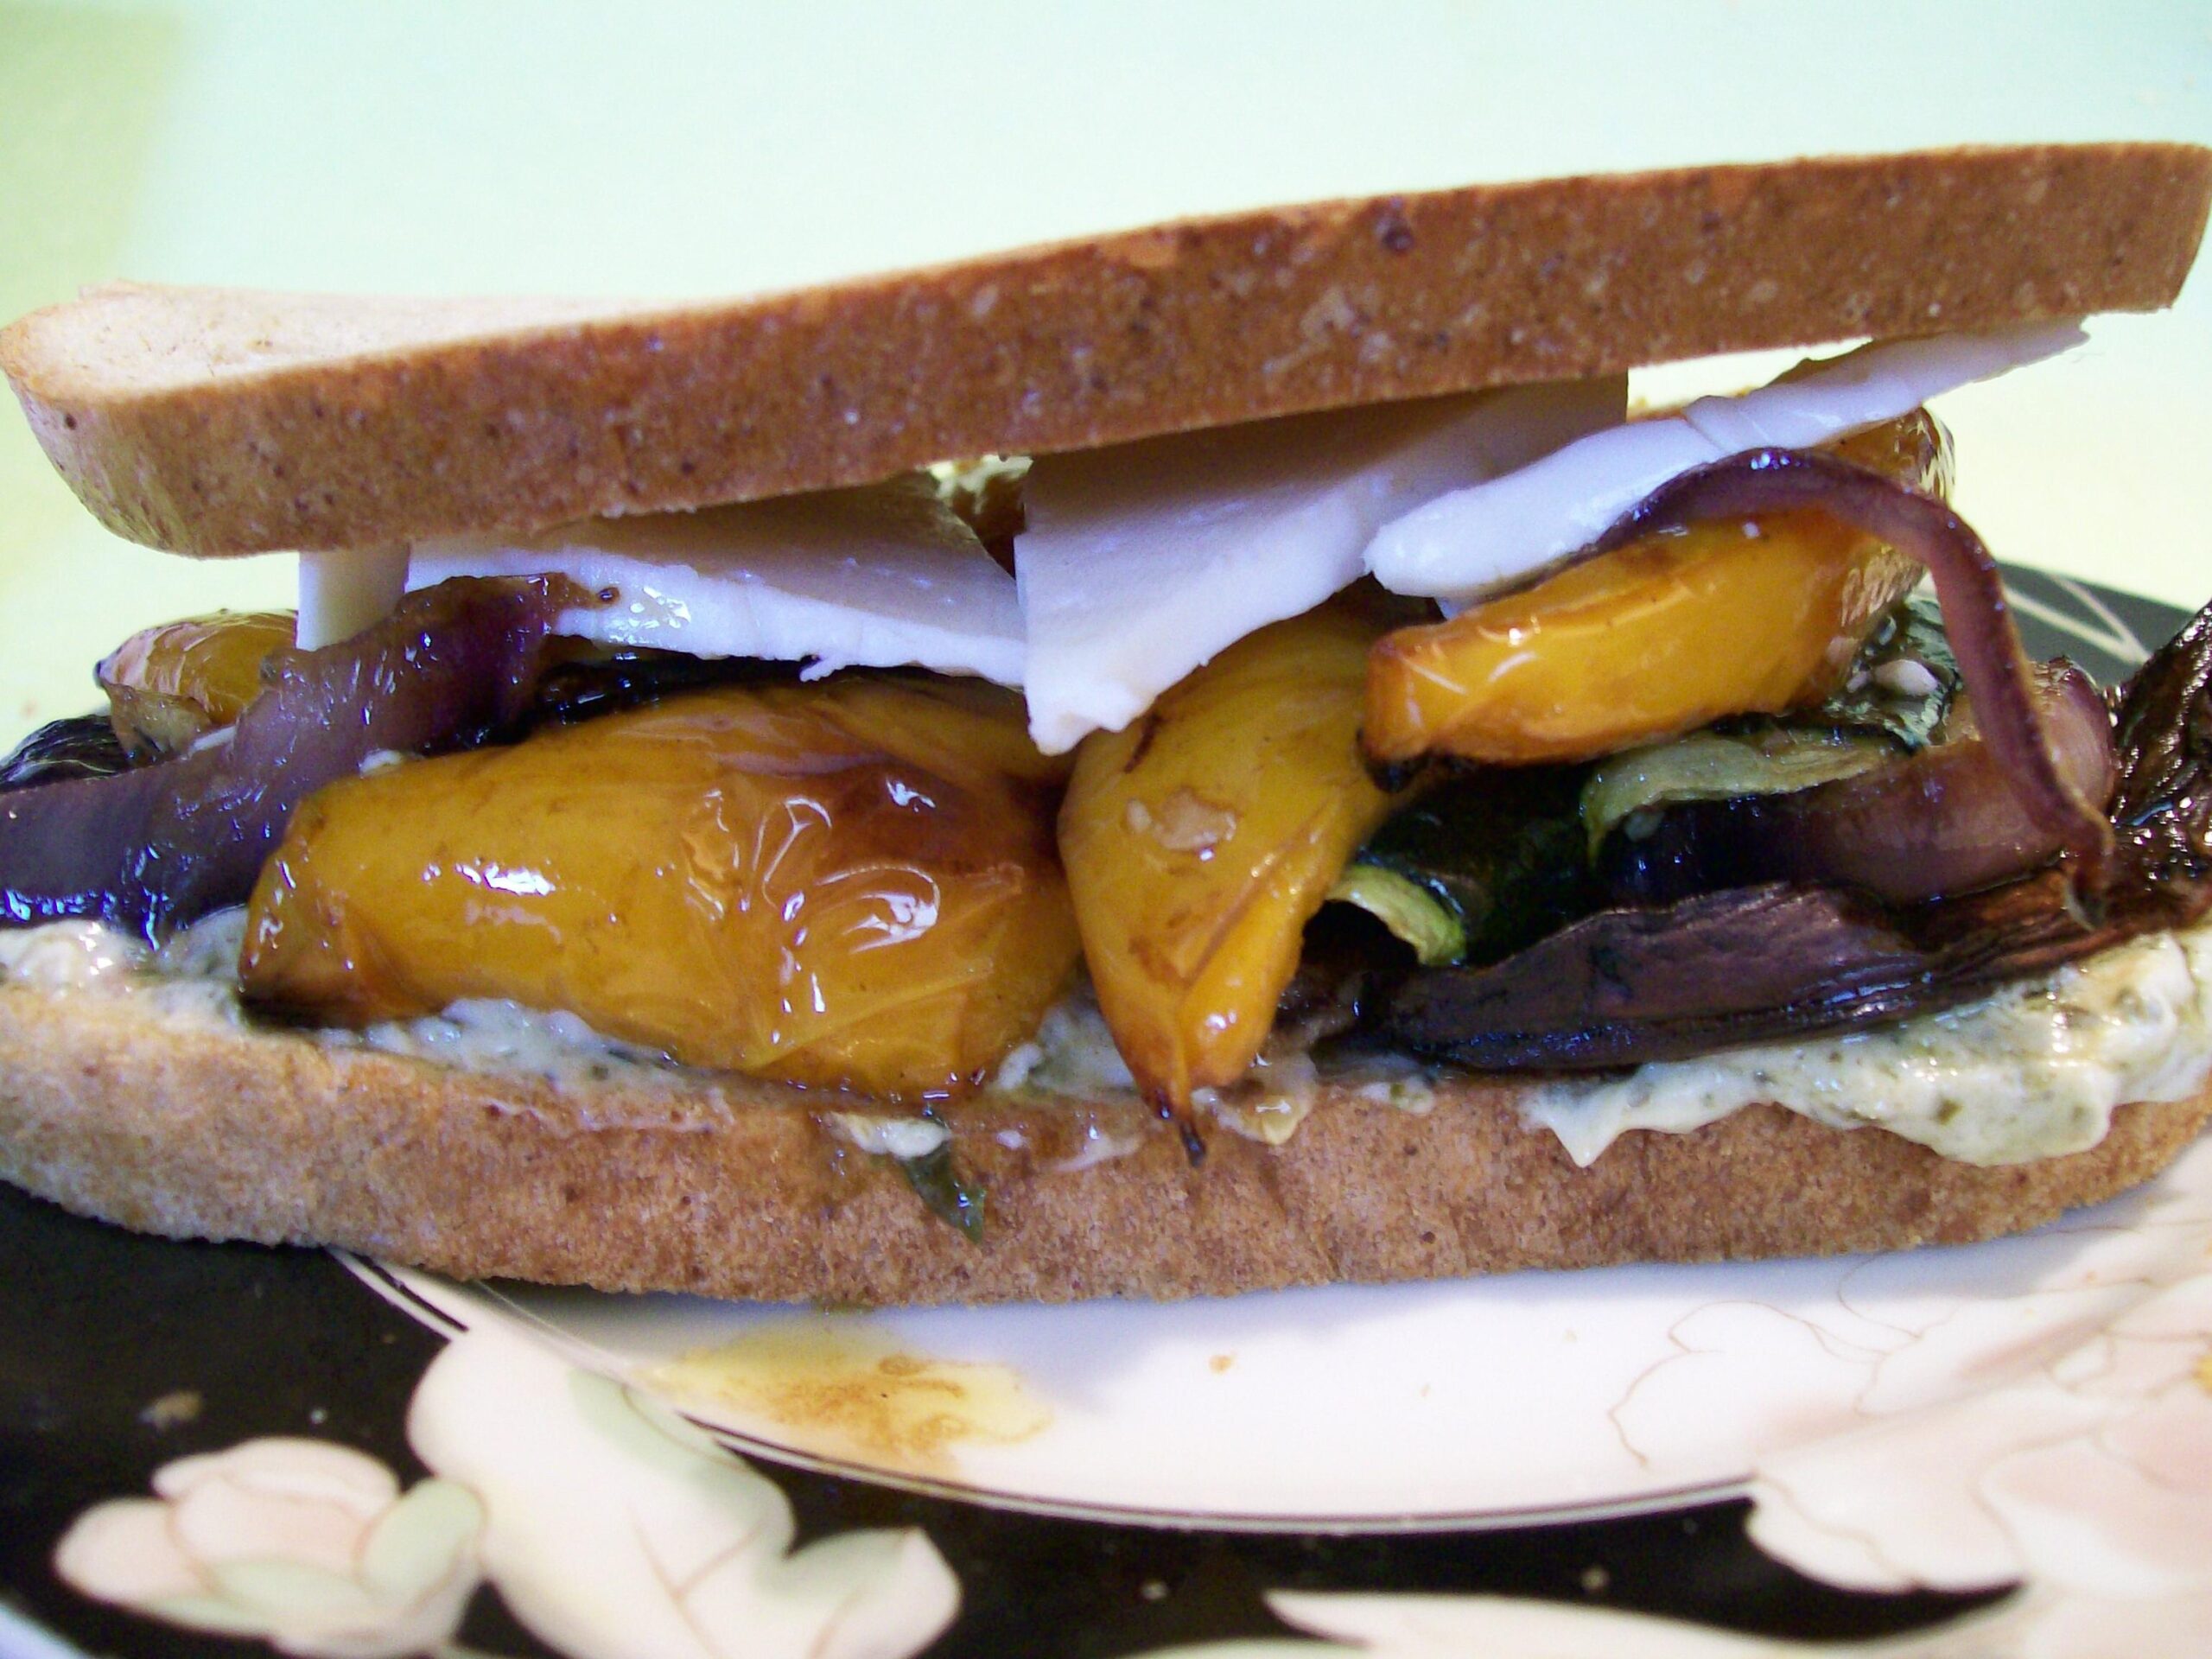  Bite into this delicious and nutritious roasted veggie sandwich with a light and creamy brie cheese spread